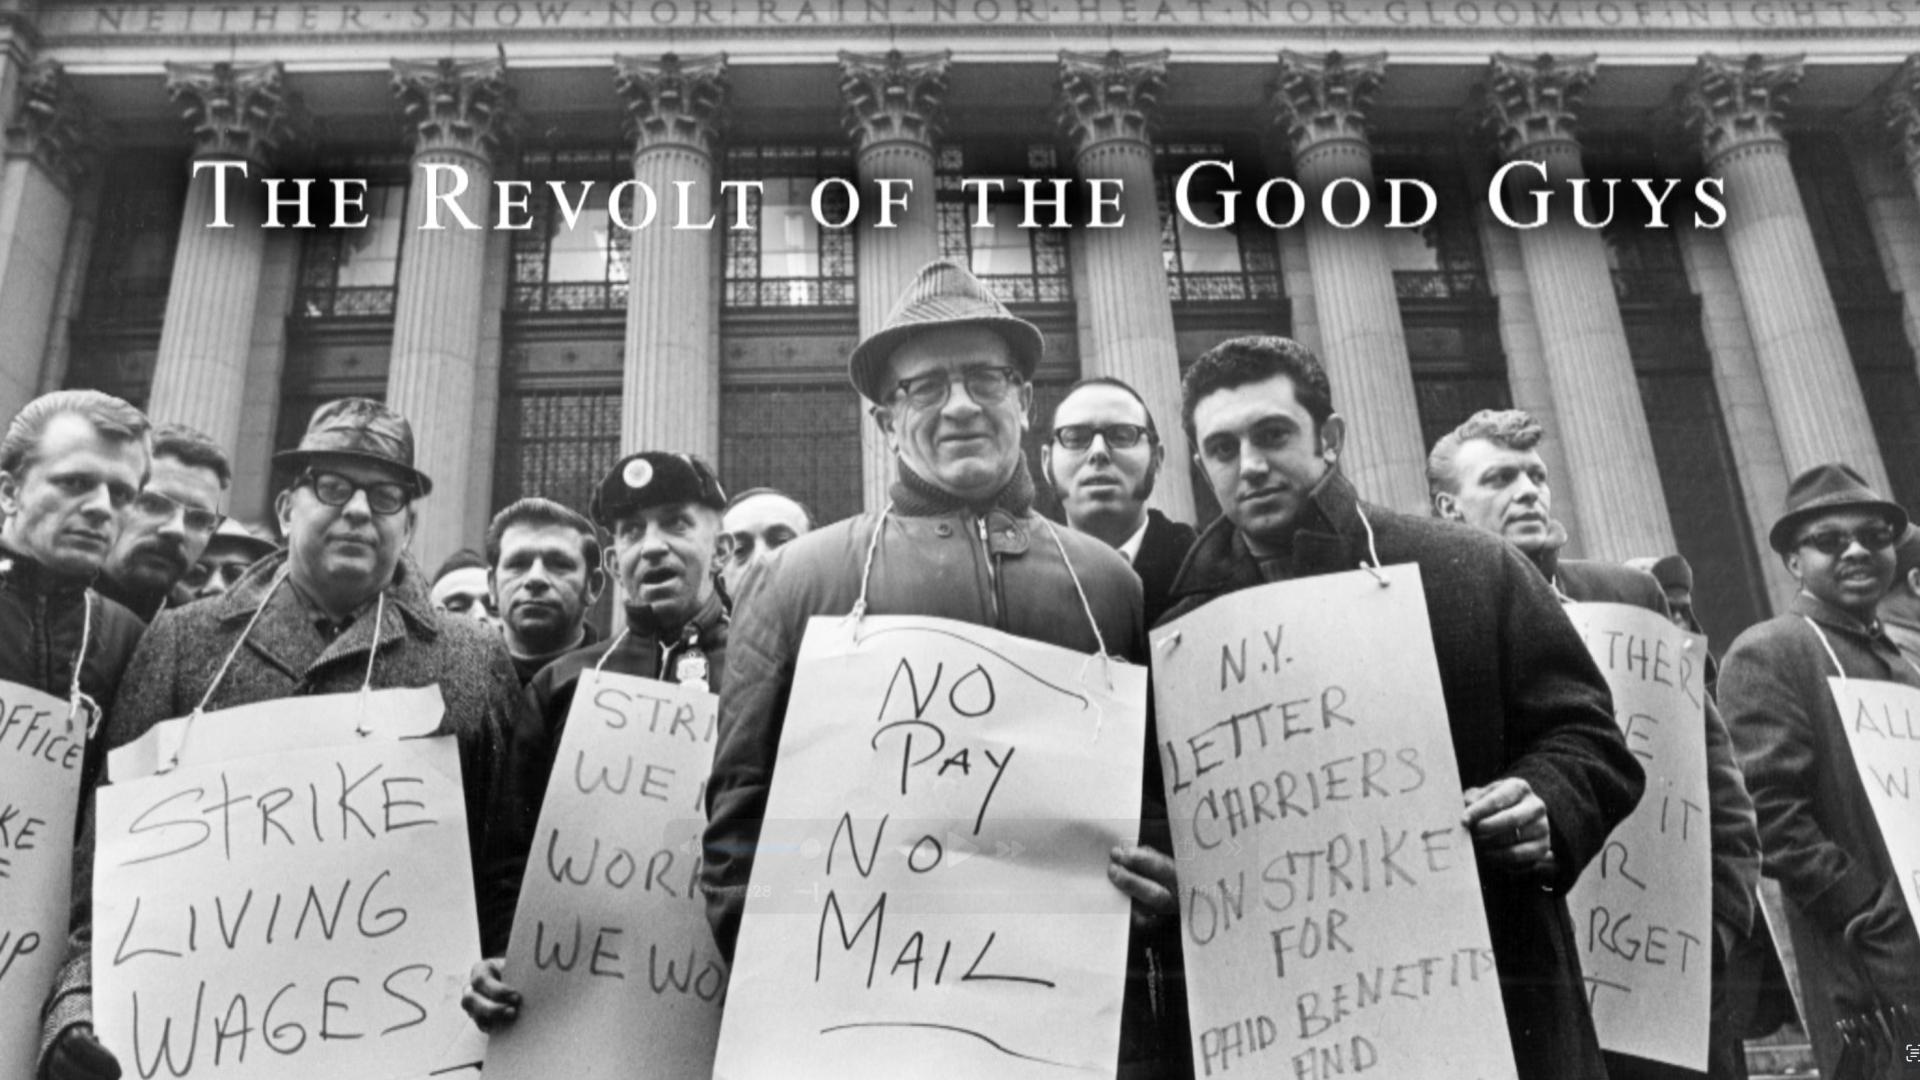 The Revolt of the Good Guys